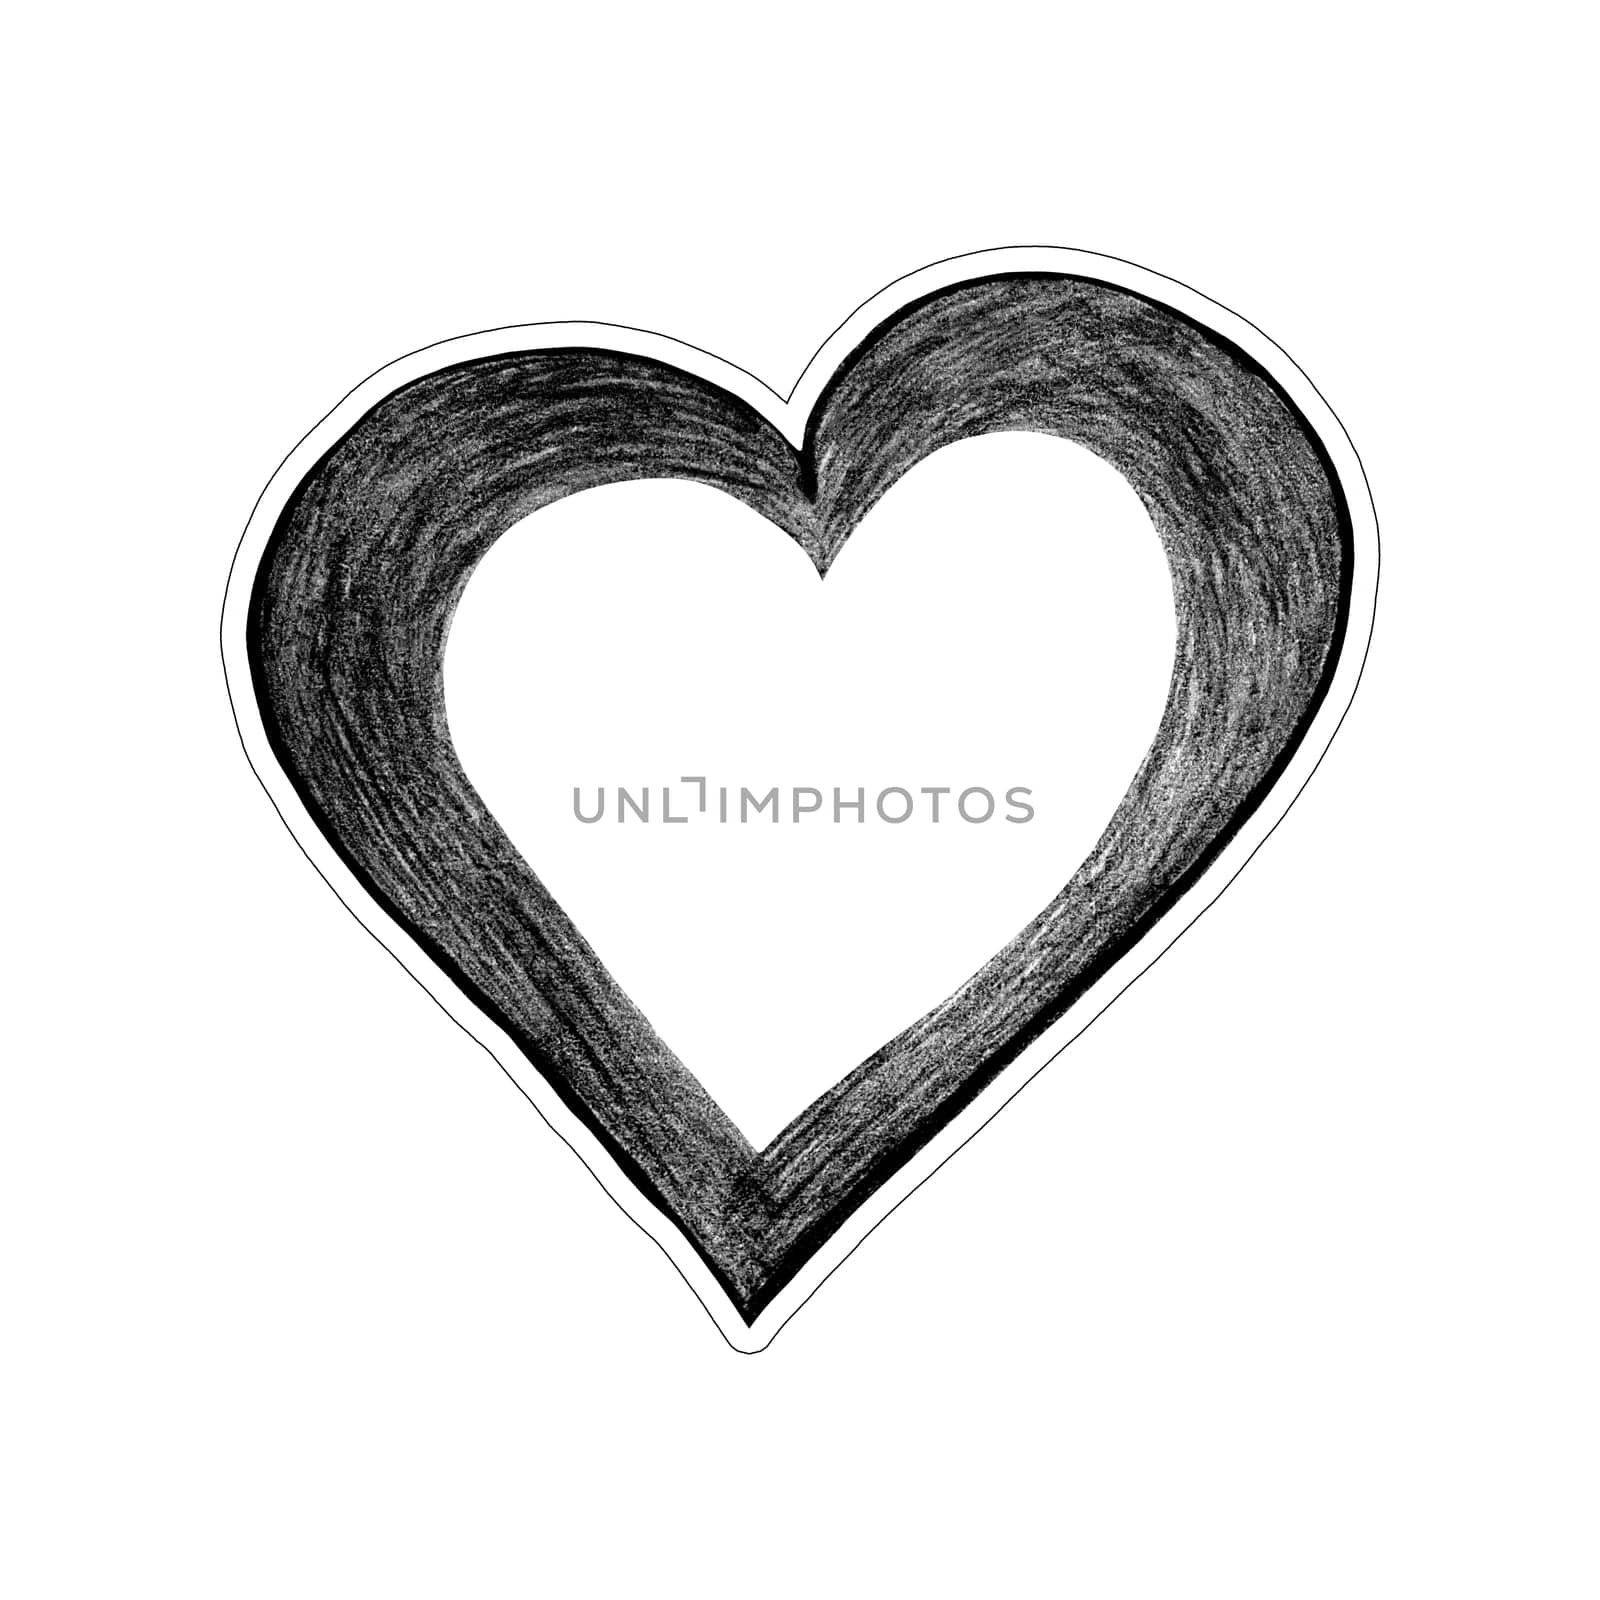 Black Heart Sticker Drawn by Colored Pencil. The Sign of World Heart Day. Symbol of Valentines Day. Heart Shape Isolated on White Background.